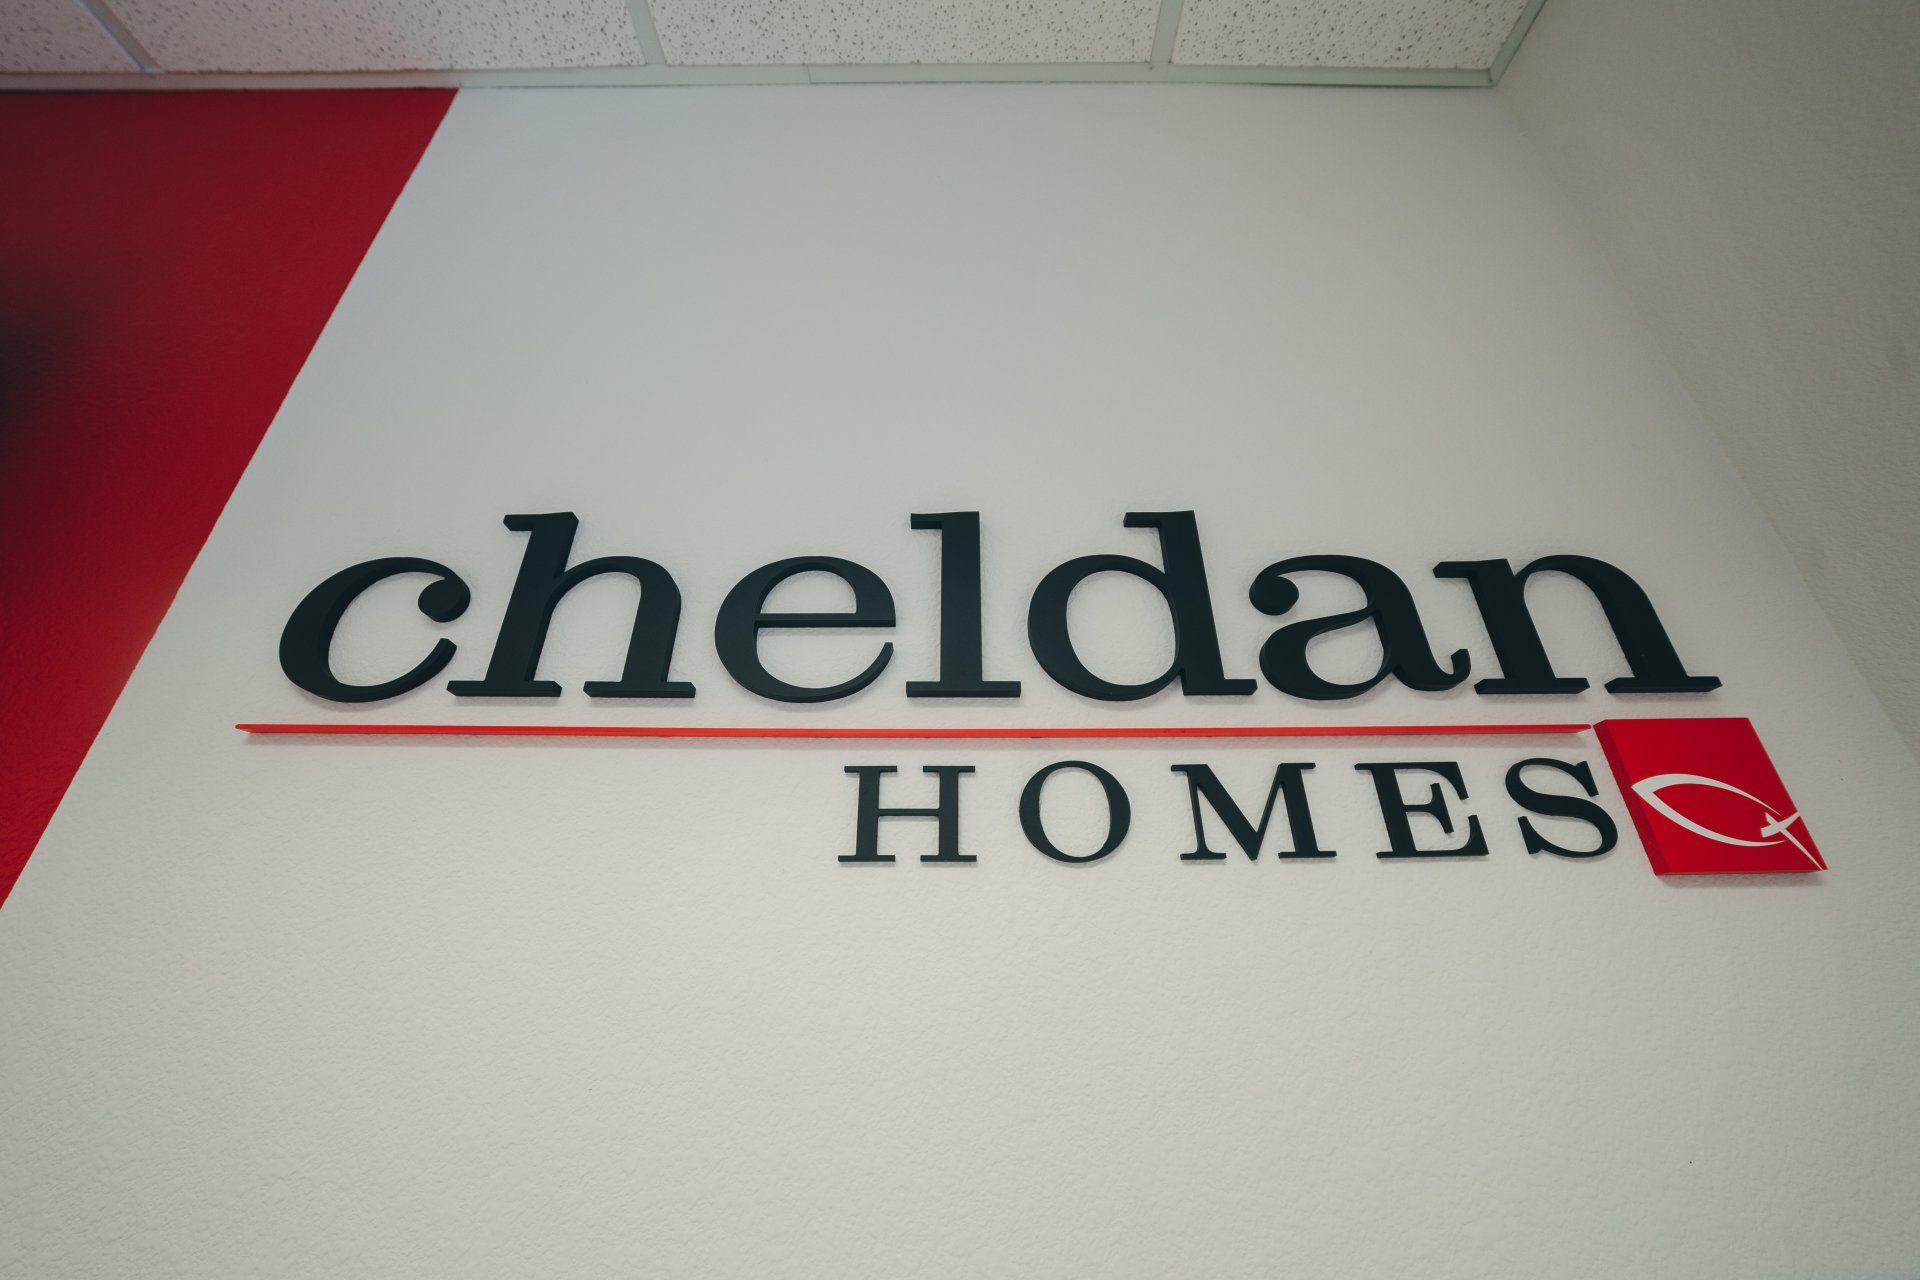 About us | cheldan homes | Fort Worth, TX 76126